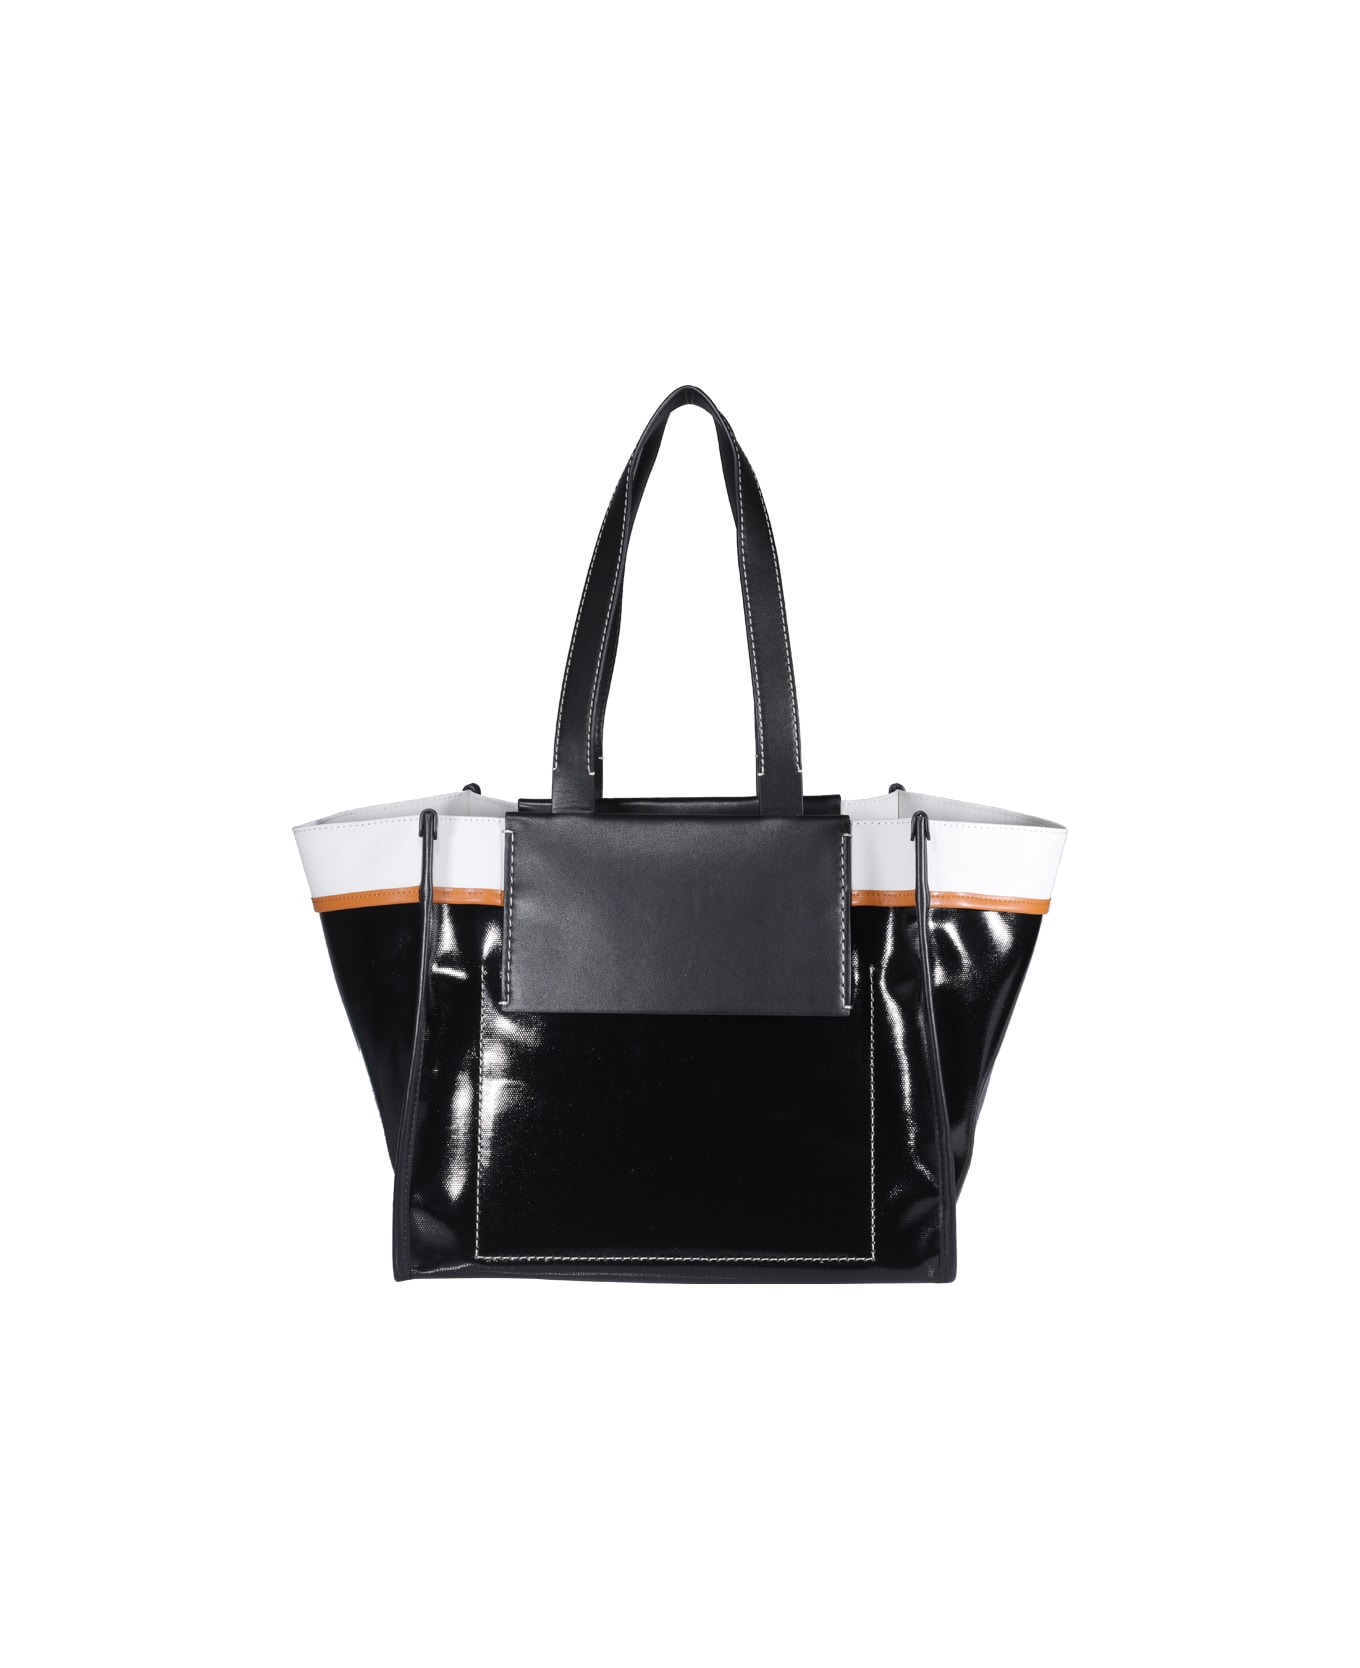 Proenza Schouler Large Morris Coated Canvas Tote - BLACK/WHITE